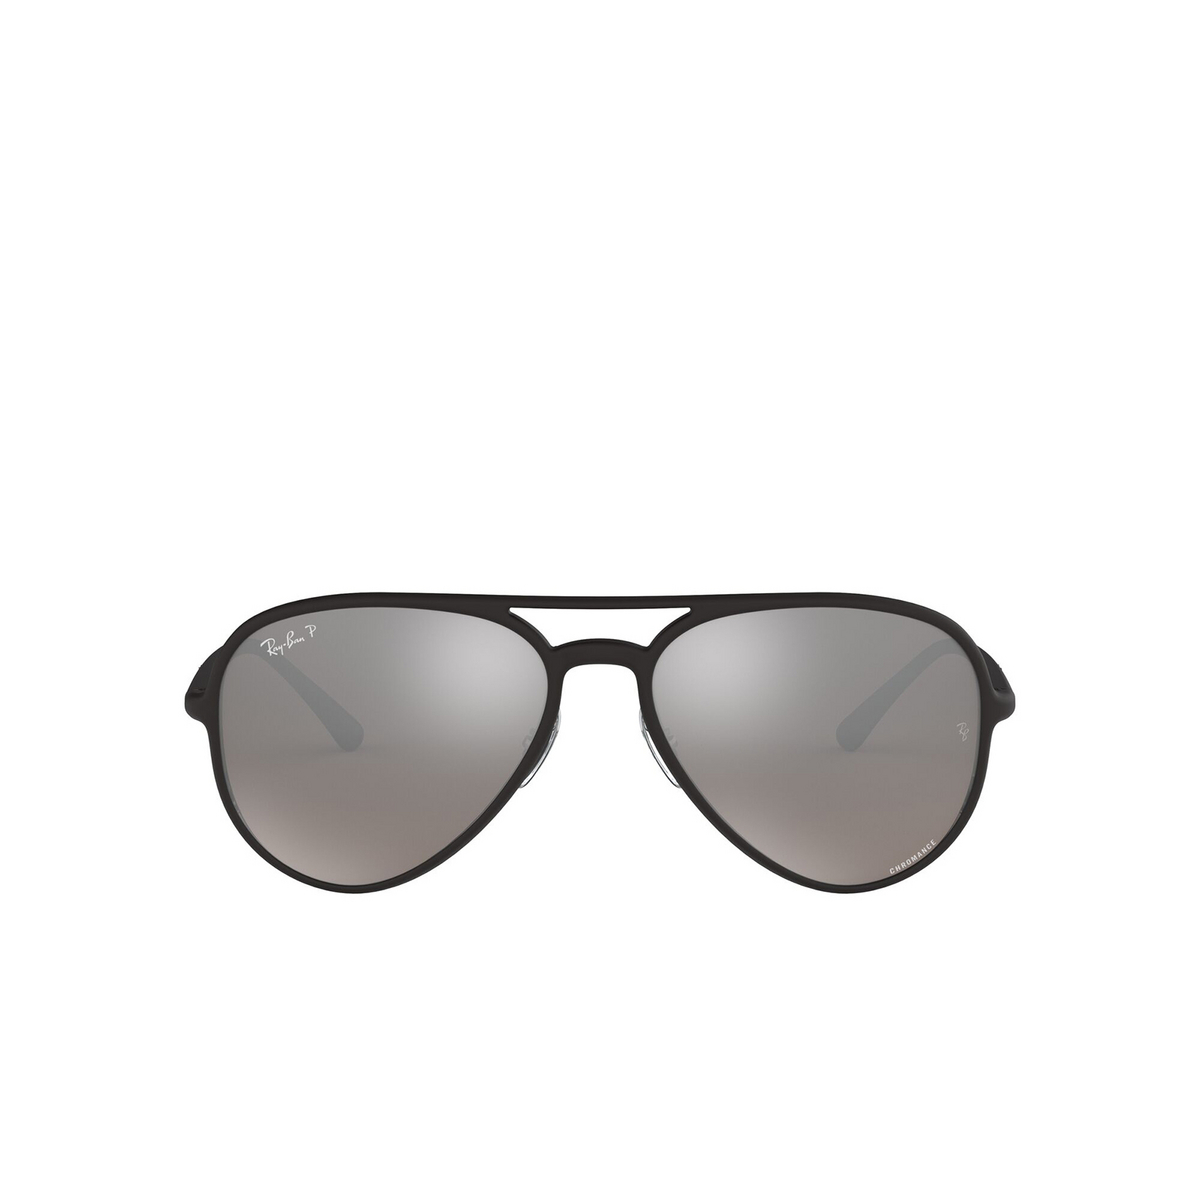 Ray-Ban® Aviator Sunglasses: RB4320CH color Matte Black 601S5J - front view.